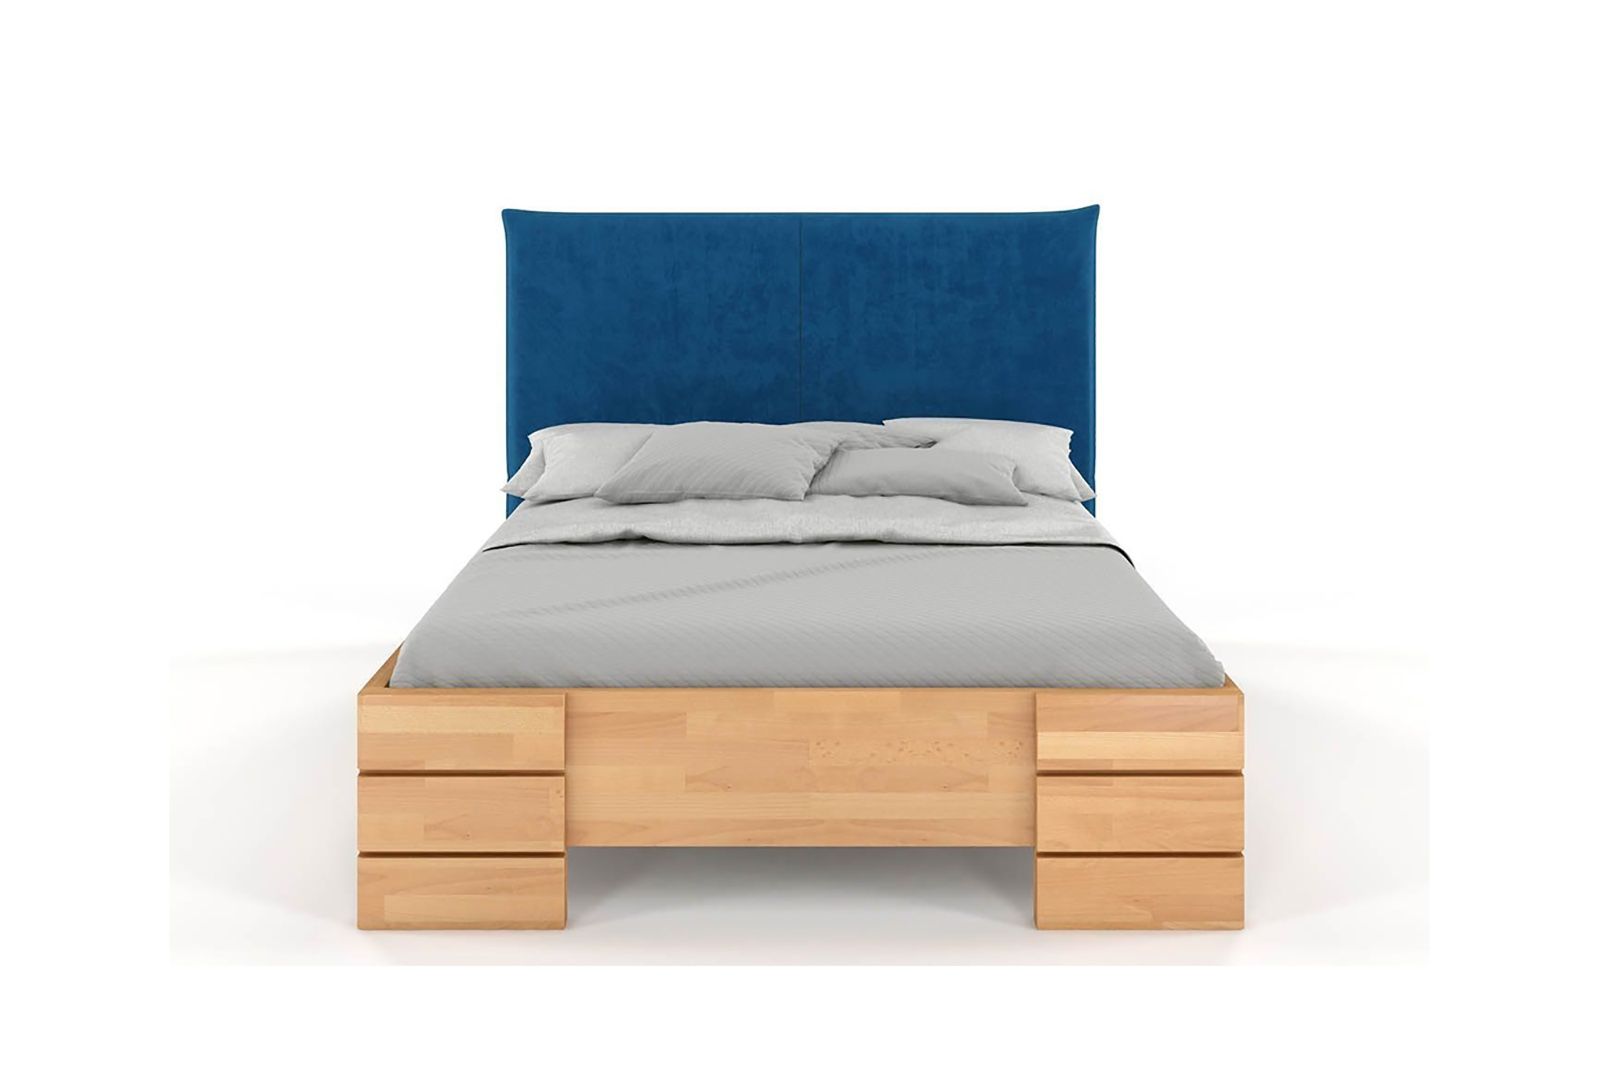 VISBY SANTAP WOODEN BEECH BED WITH AN UPHOLSTERED HEADBOARD 1